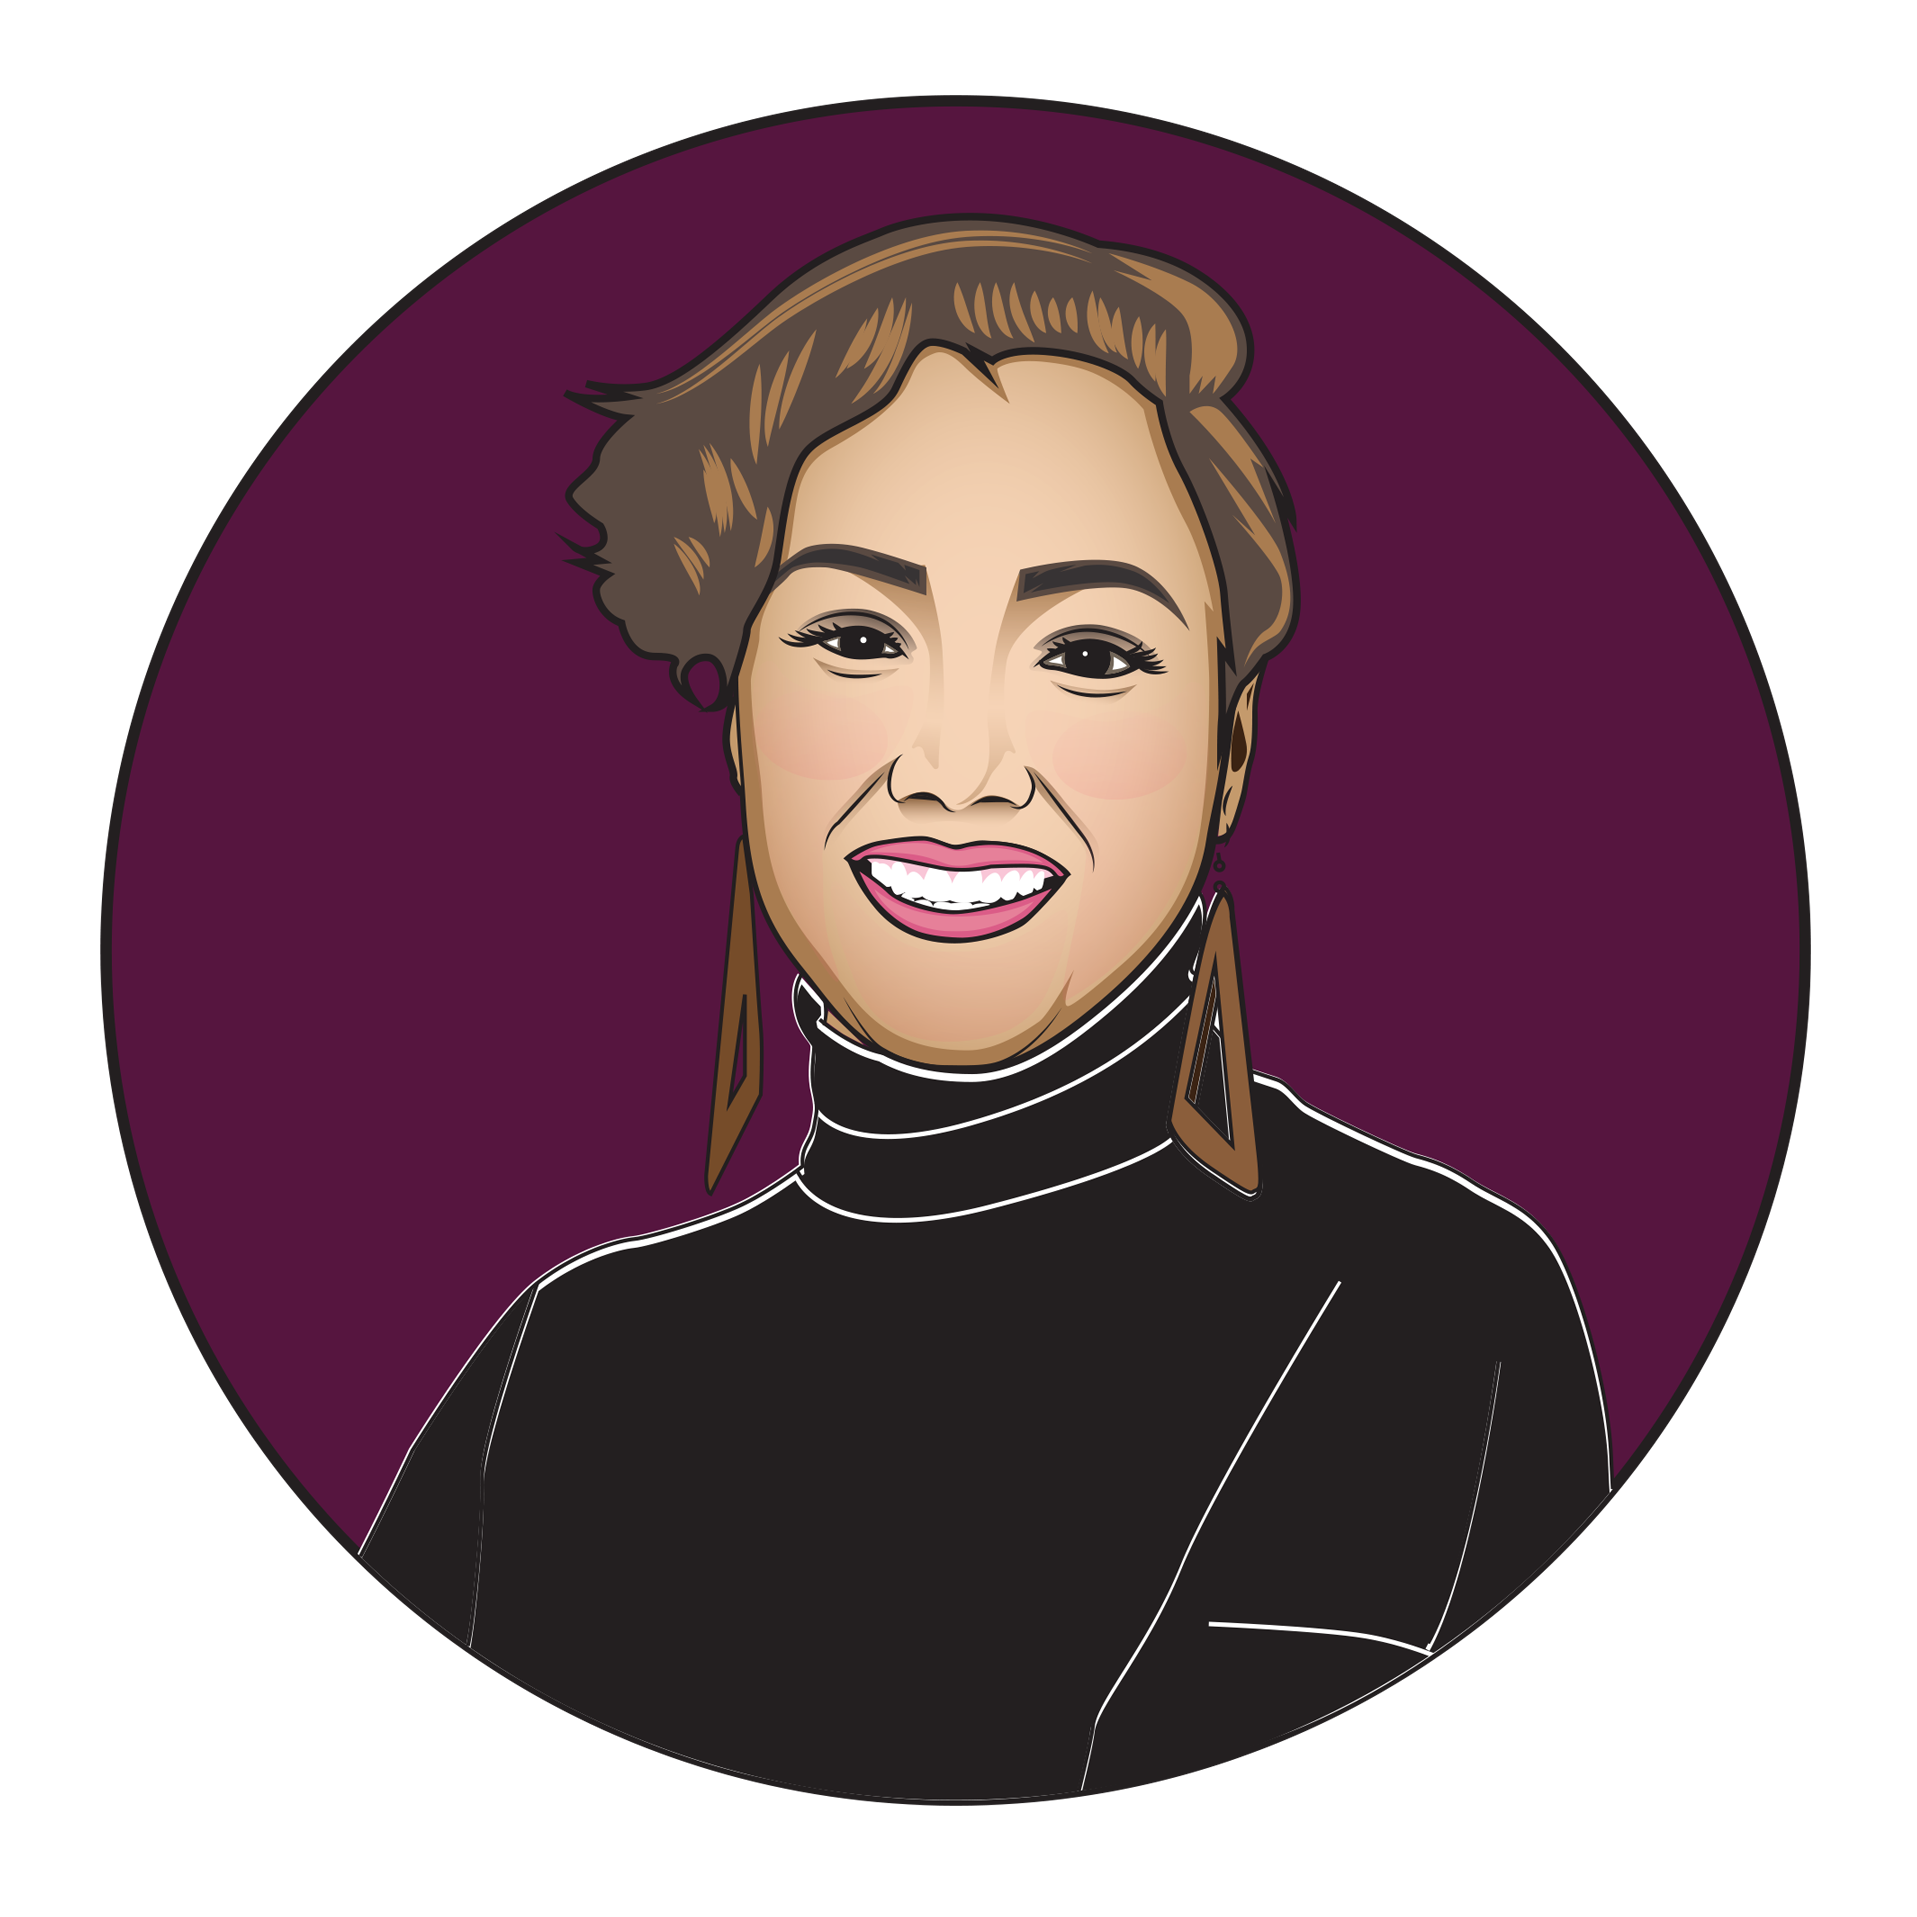 An illustrated image of Jessica, a light skinned Black woman. She is wearing a black turtleneck and brown triangle earrings. She has a brown short haircut and is wearing pink lipstick. Her image is on a burgundy background.